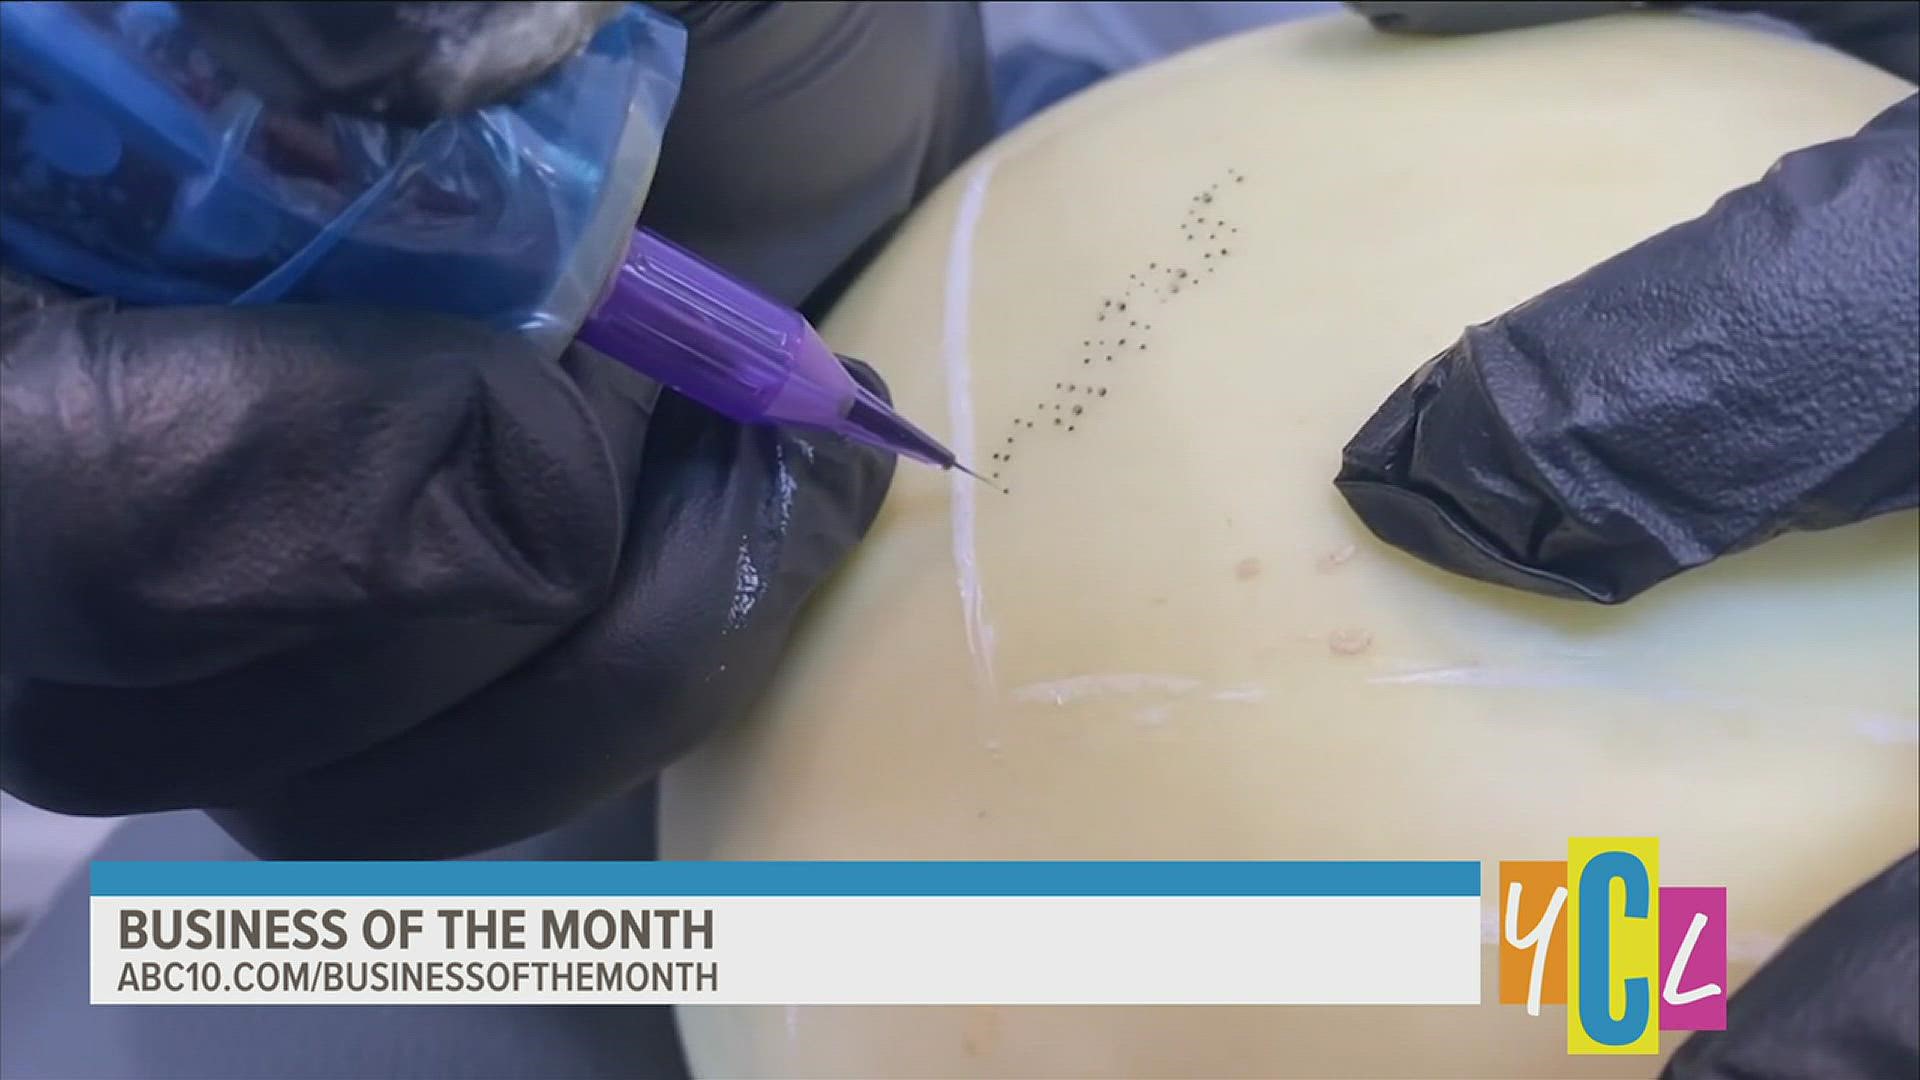 Meet the tattoo micro-pigmentation business that has made a major impact on their community! To nominate a business, go to abc10.com/businessofthemonth